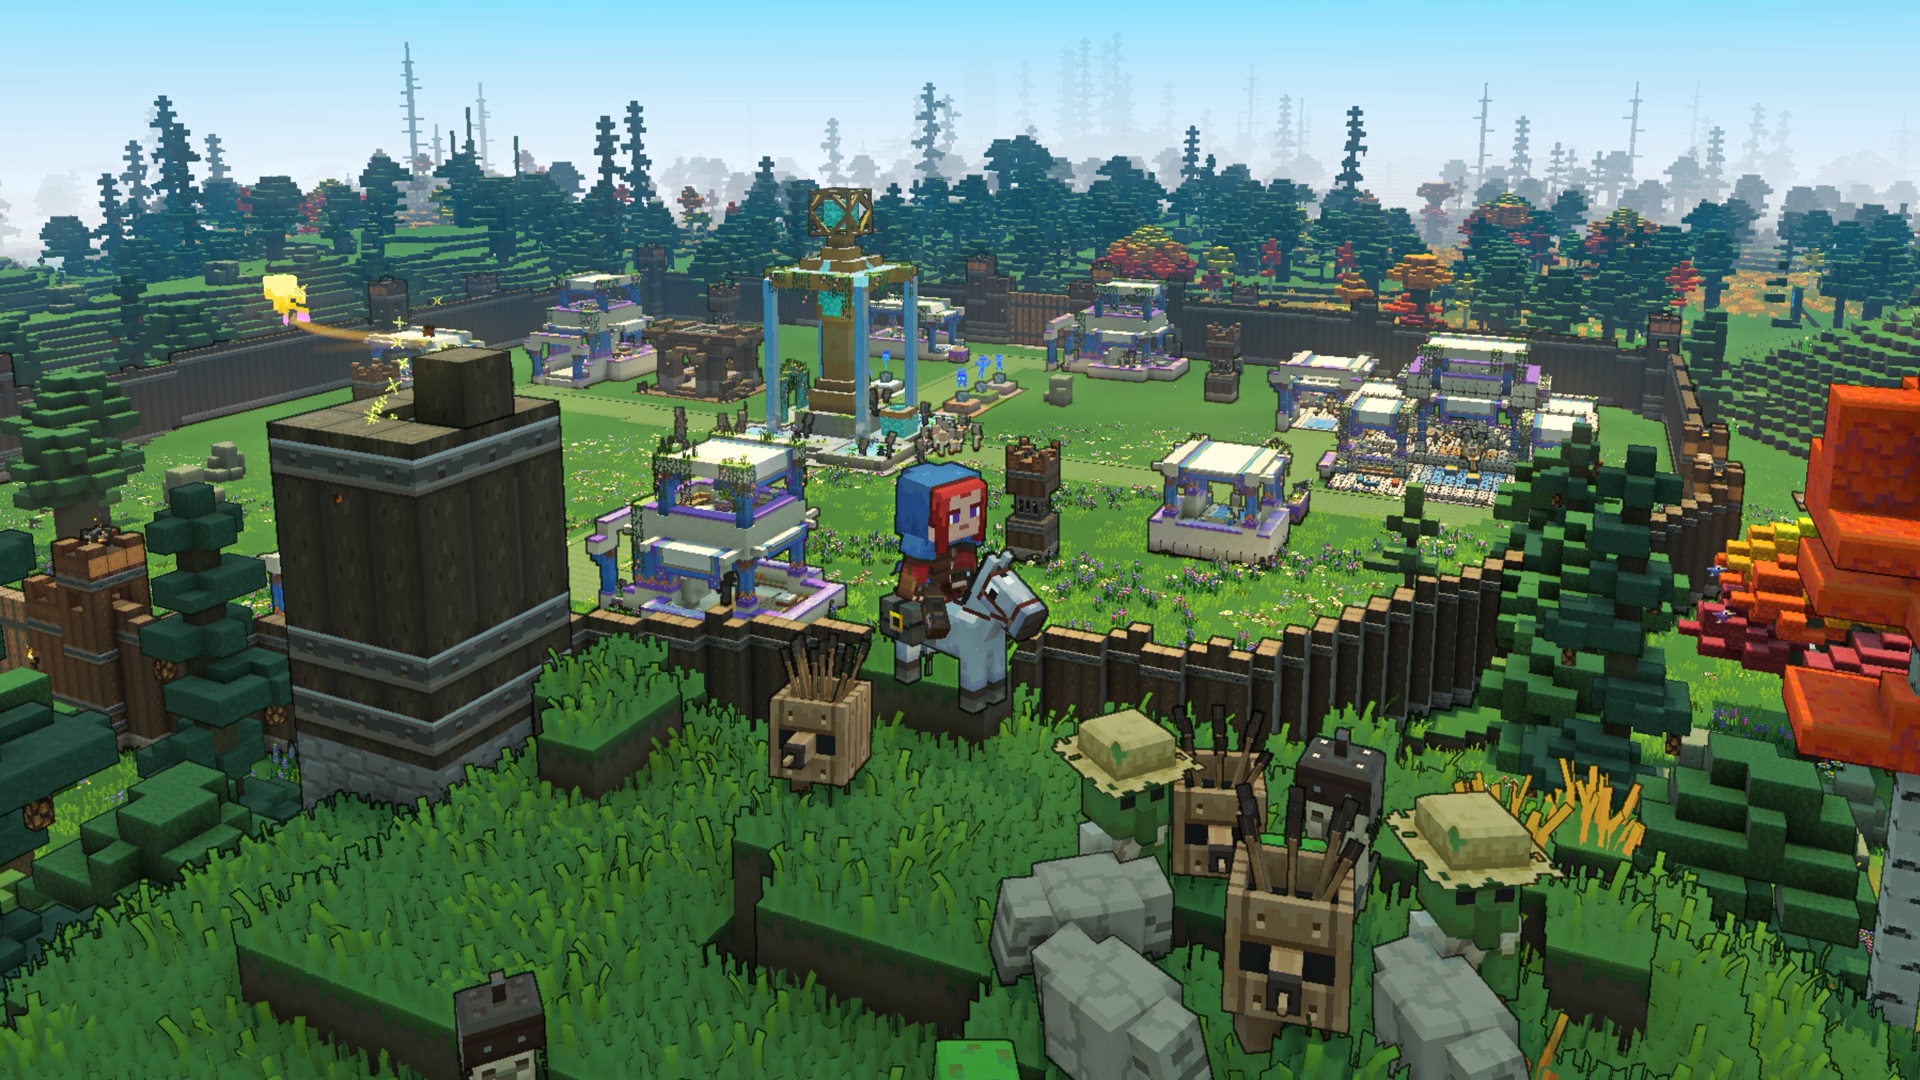 Minecraft Legends player on a mount stands on a grassy hill overlooking a base with wood walls and several structures inside.